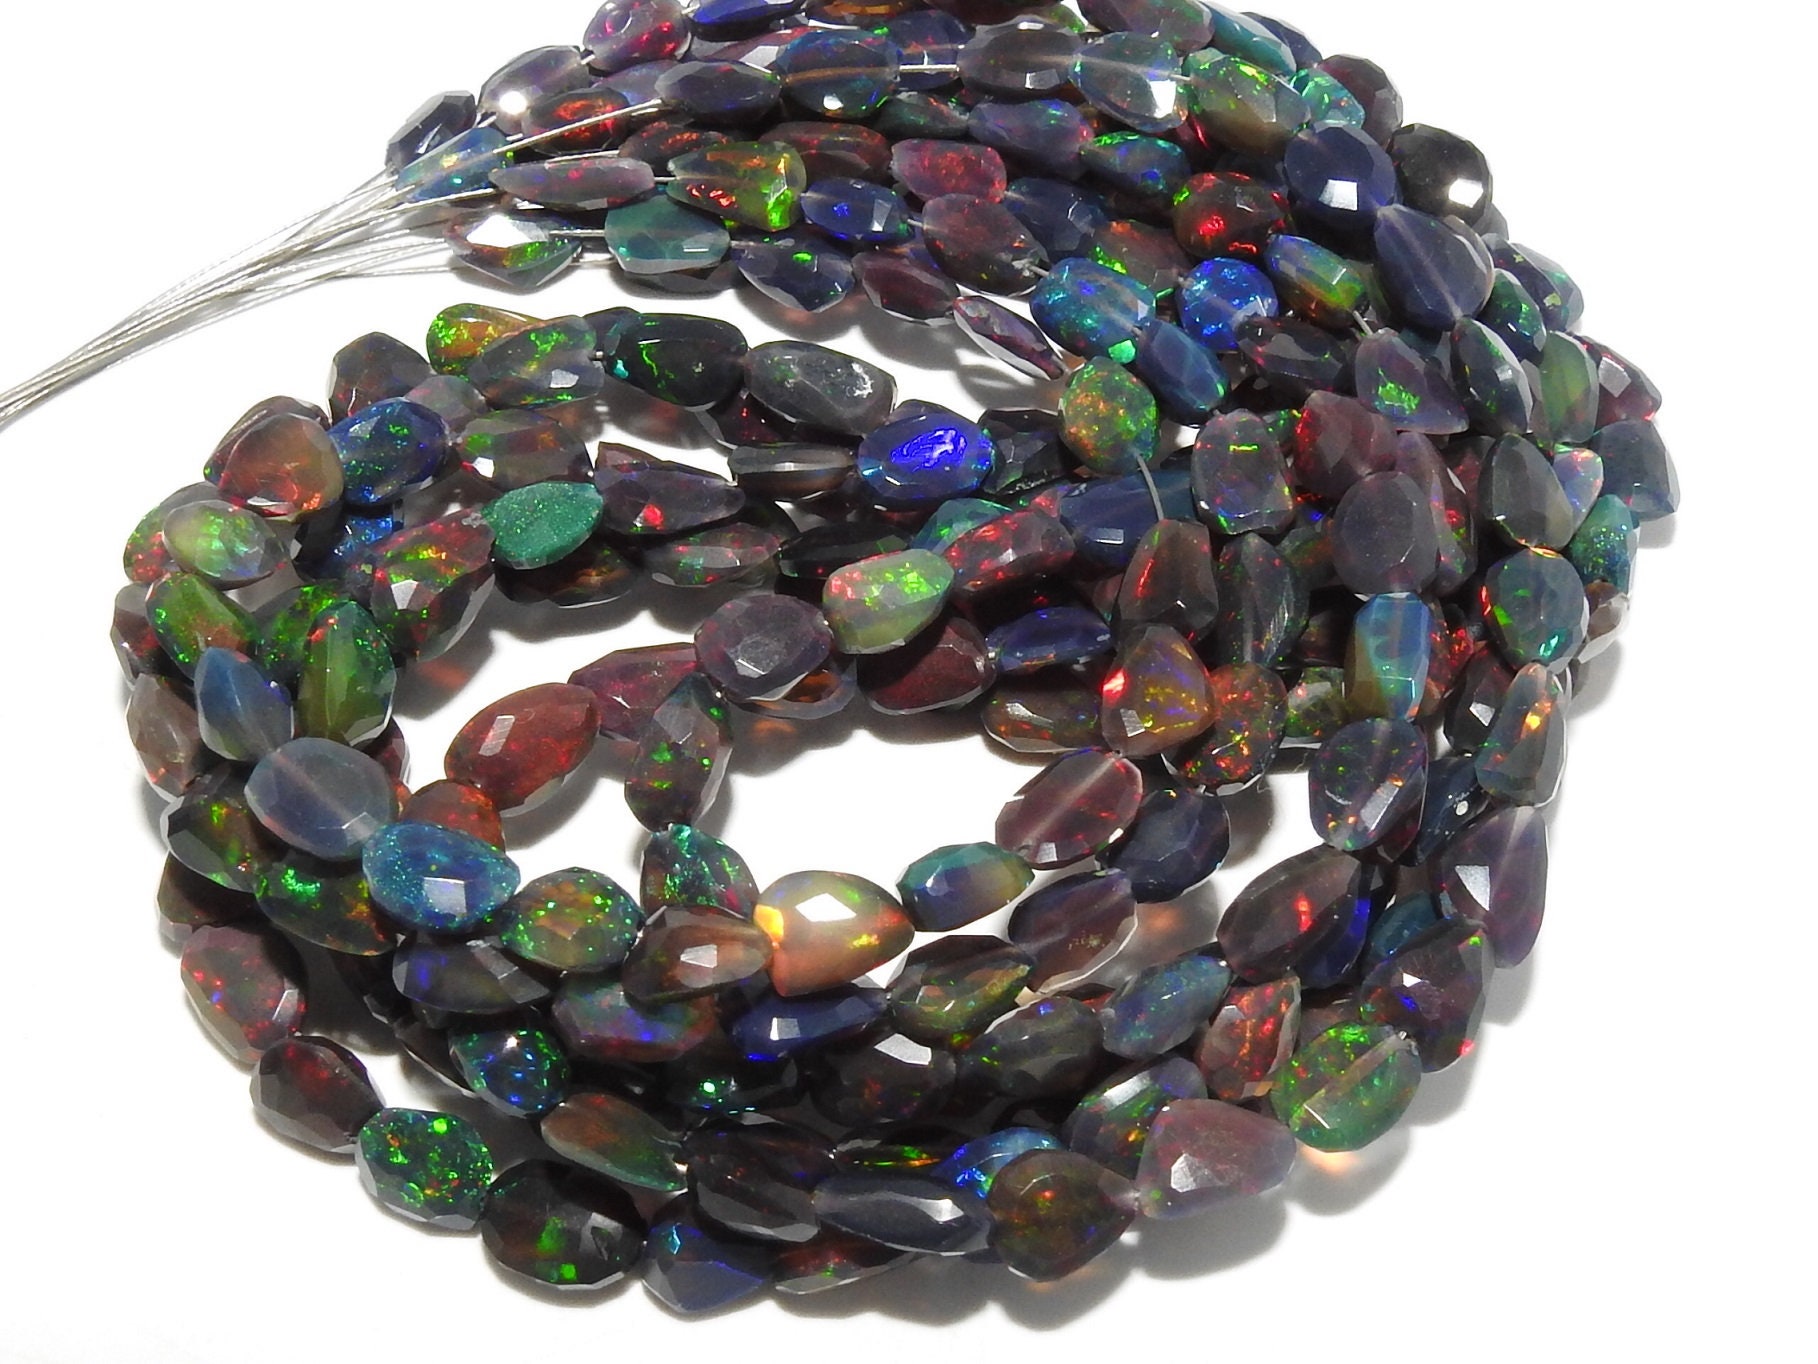 Ethiopian Black Opal Faceted Tumble,Nugget,Multi Flashy Fire,Loose Stone,Loose Bead,Wholesaler,Supplies 12Inch Strand 100%Natural (pme)EO2 | Save 33% - Rajasthan Living 17